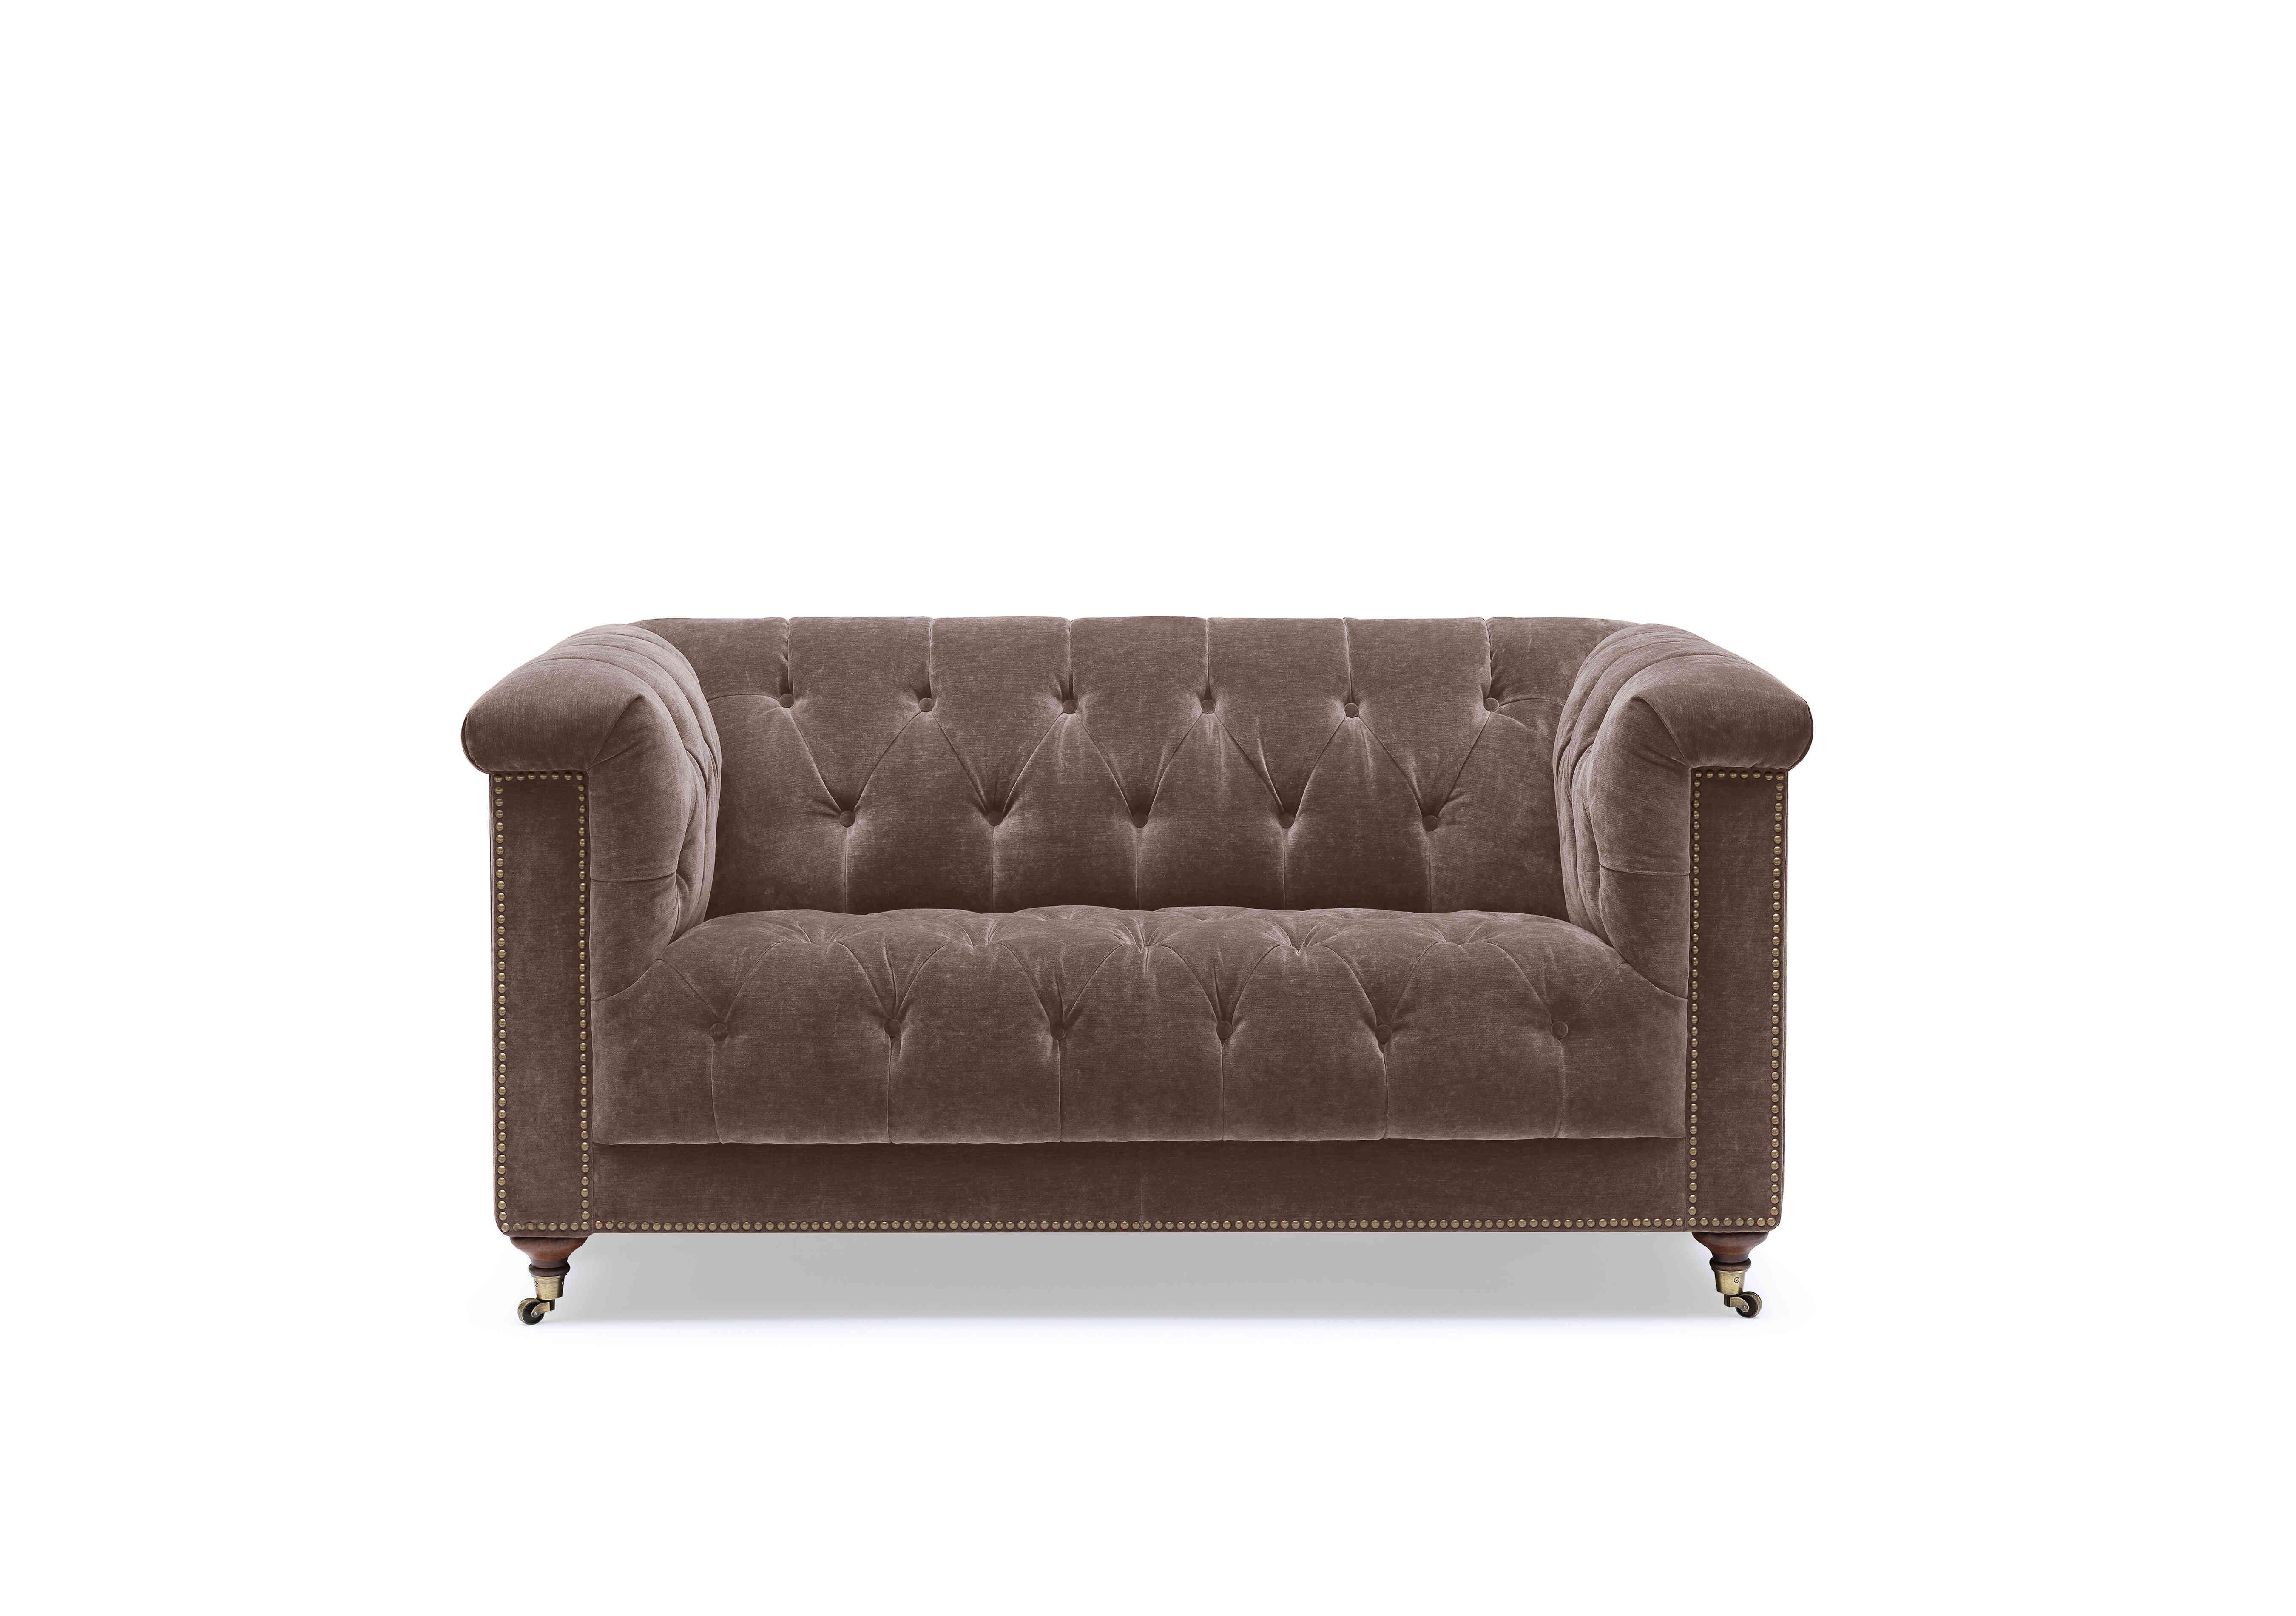 Wallace 2 Seater Fabric Chesterfield Sofa with USB-C in X3y1-W023 Antler on Furniture Village